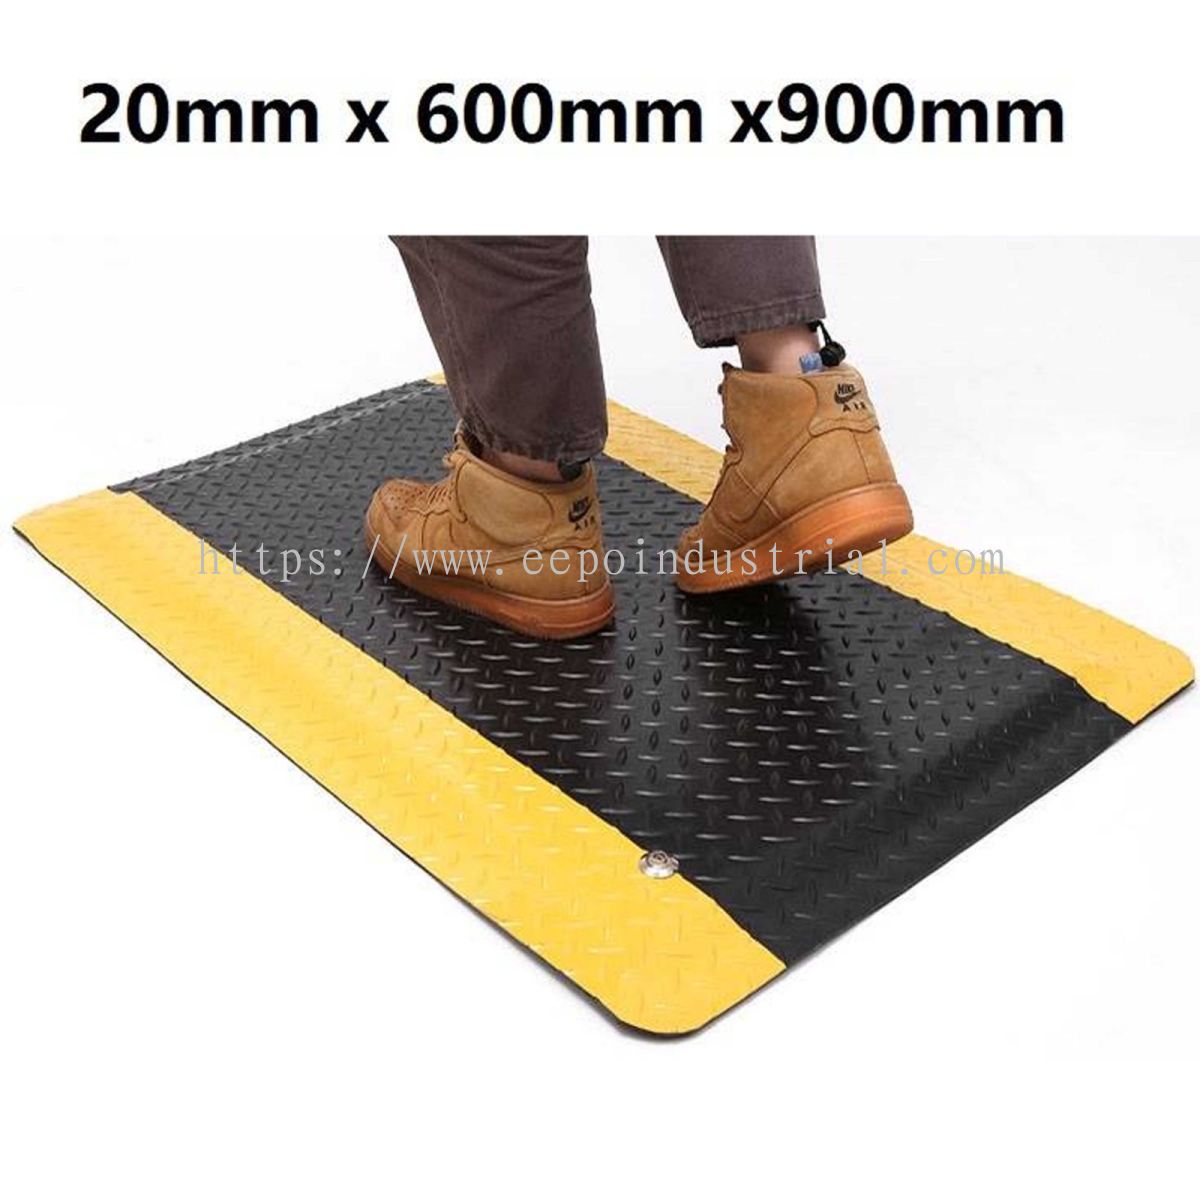 Anti Static Rubber Mat  Products - EEPO Industrial Sdn Bhd